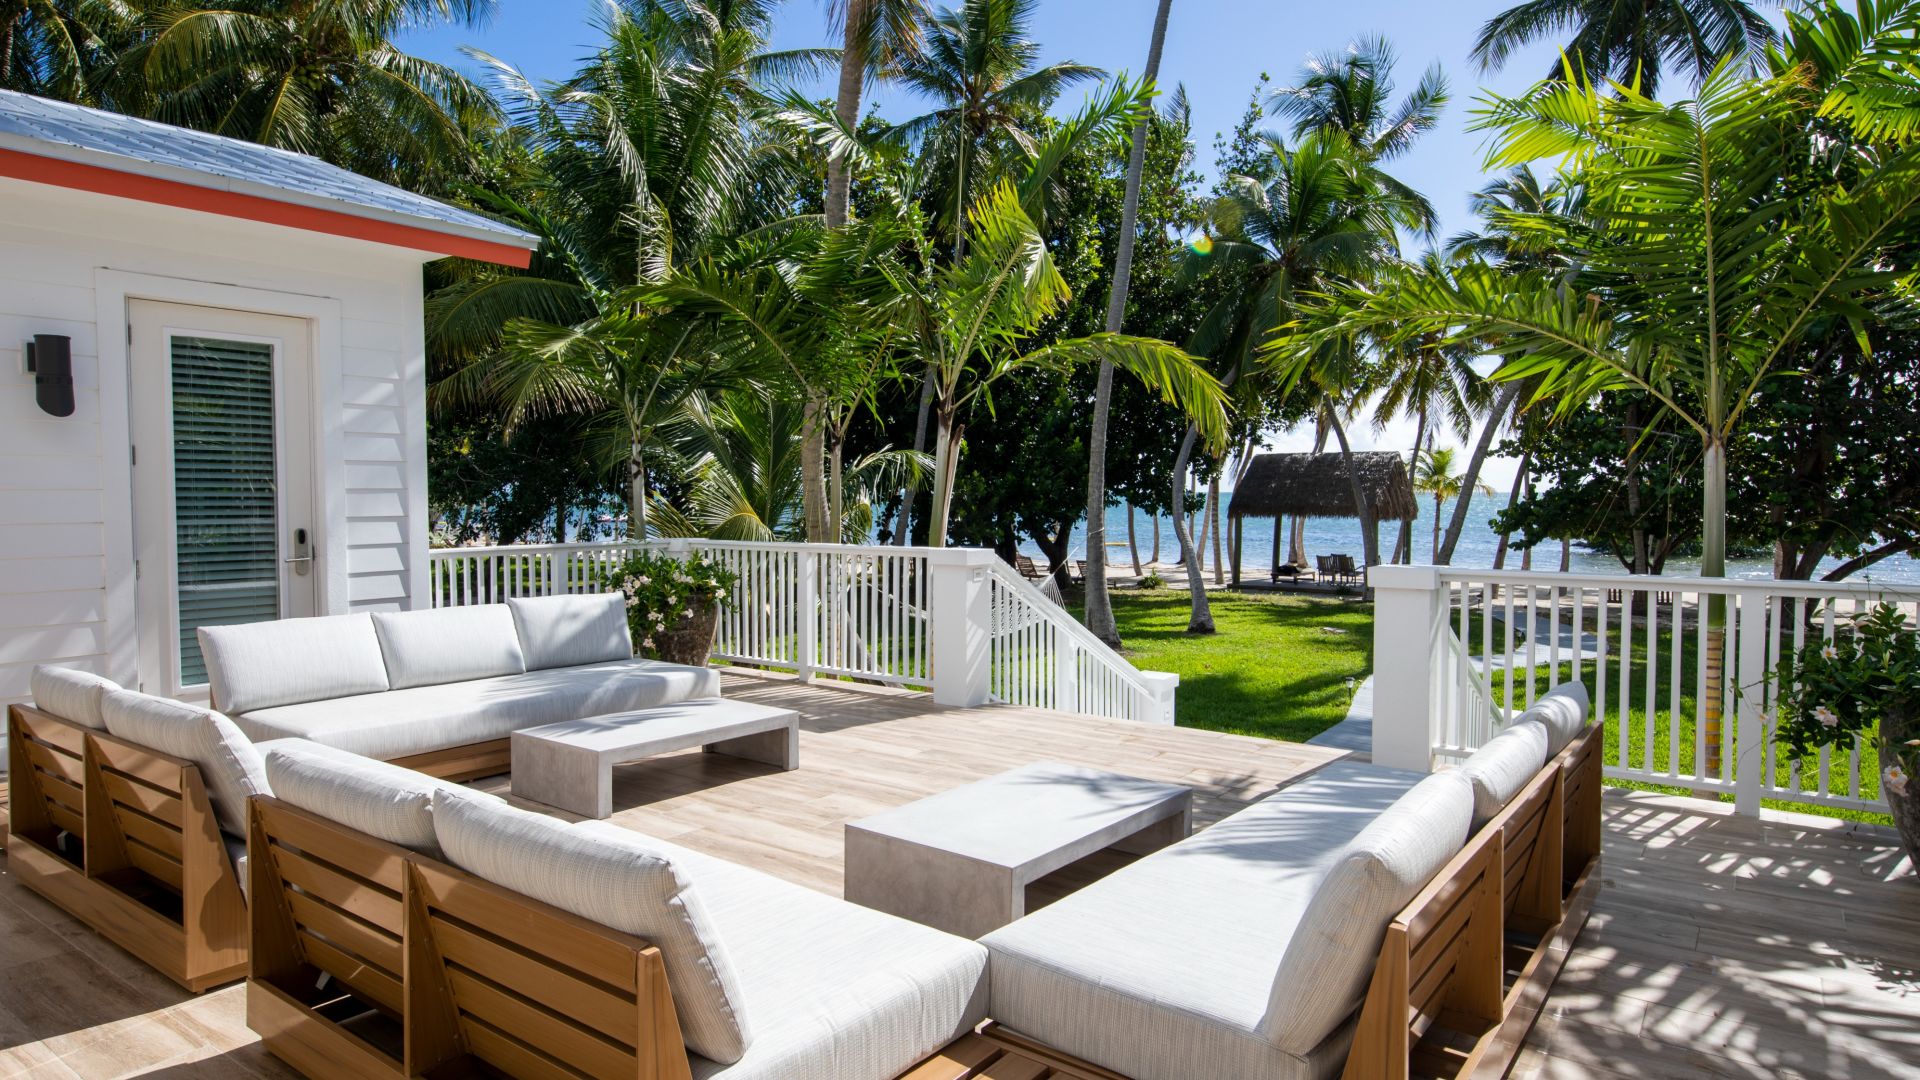 A Deck With A White Couch And Palm Trees